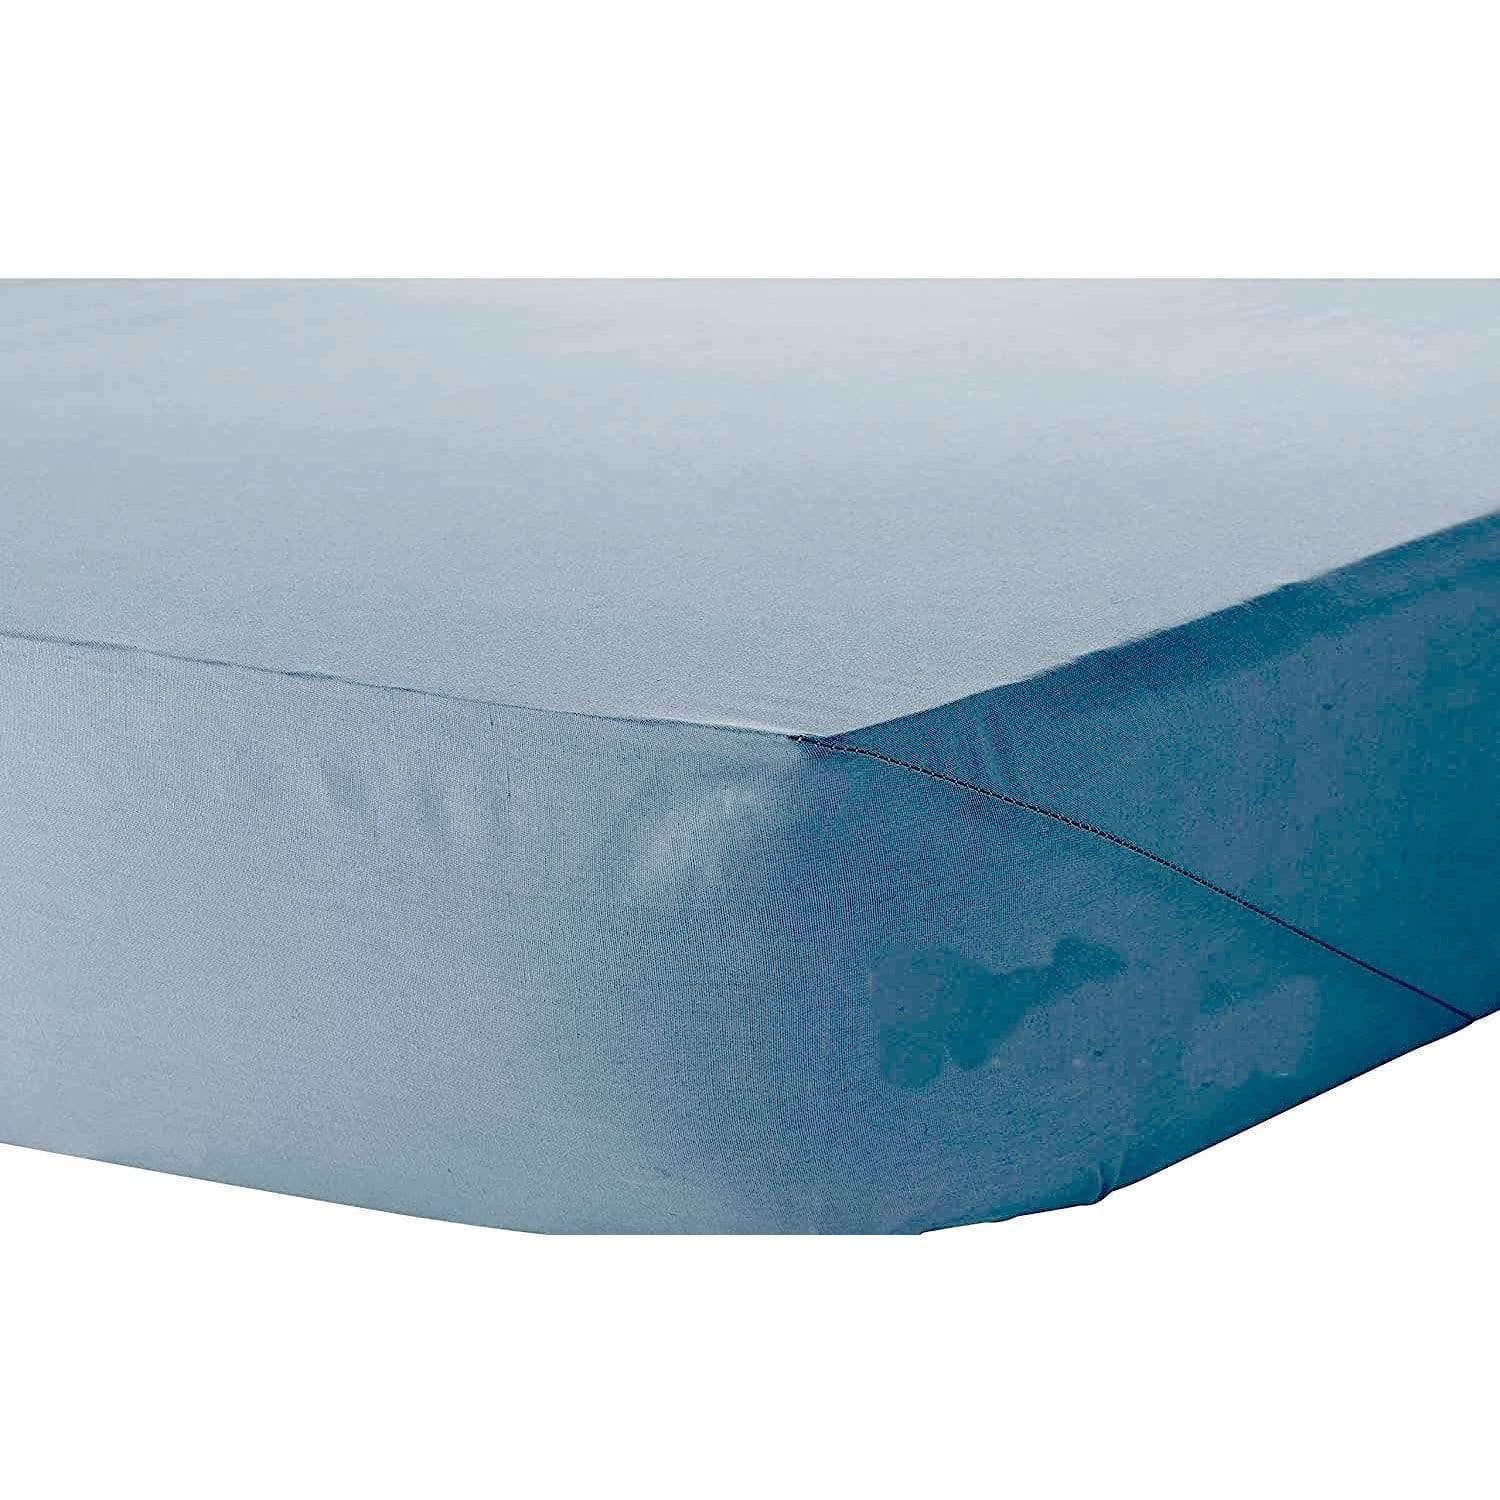 Percale Fitted Sheet SINGLE / DUCKEGG OLIVIA ROCCO Fitted Sheet